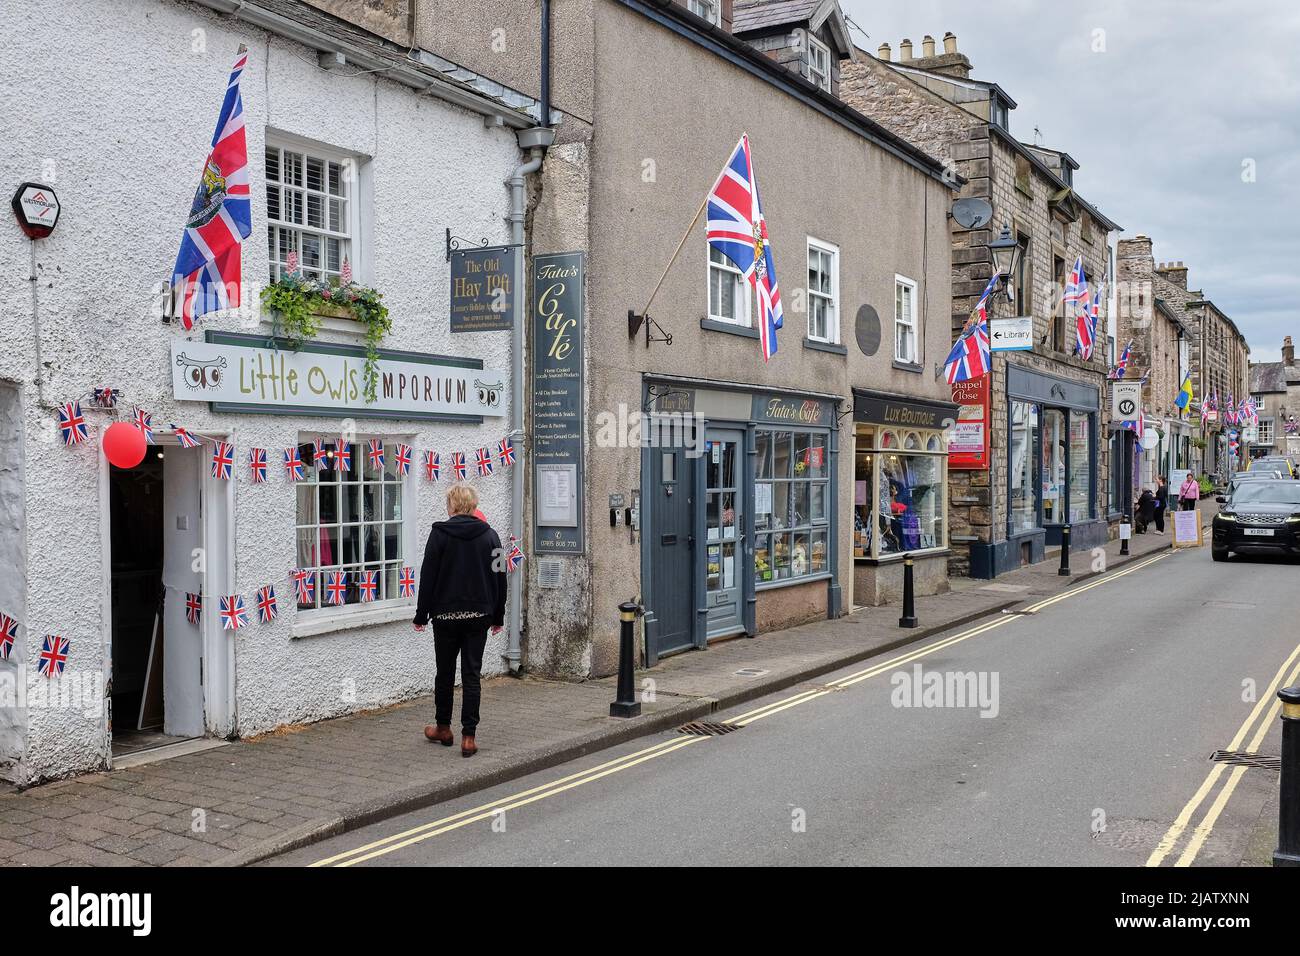 A street in a pretty tourist town on the edge of the Yorkshire Dales and Lake District showing storefronts and a shopper with the Union Flag flying in Stock Photo